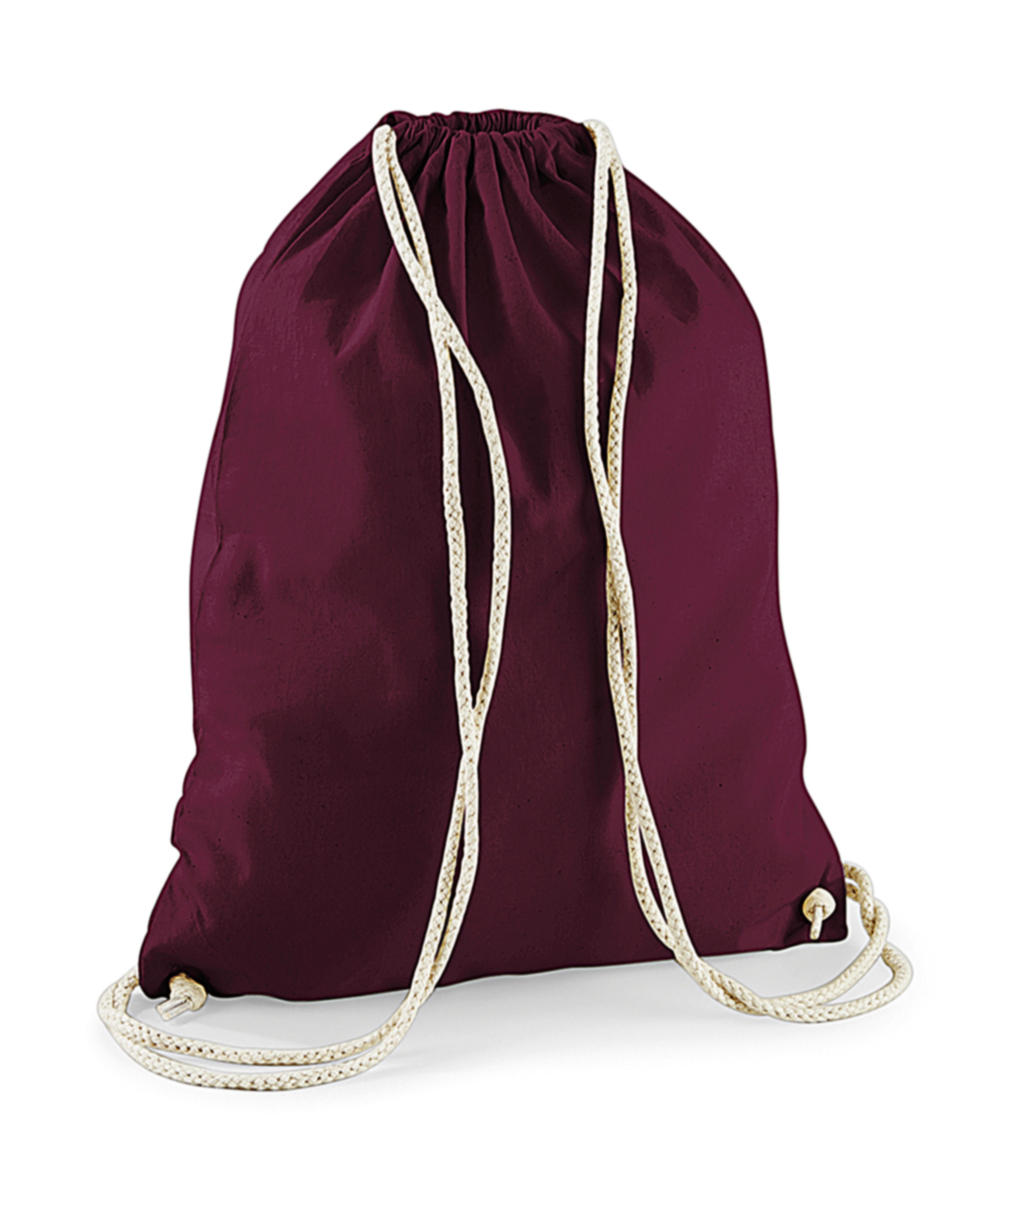  Cotton Gymsac in Farbe Burgundy